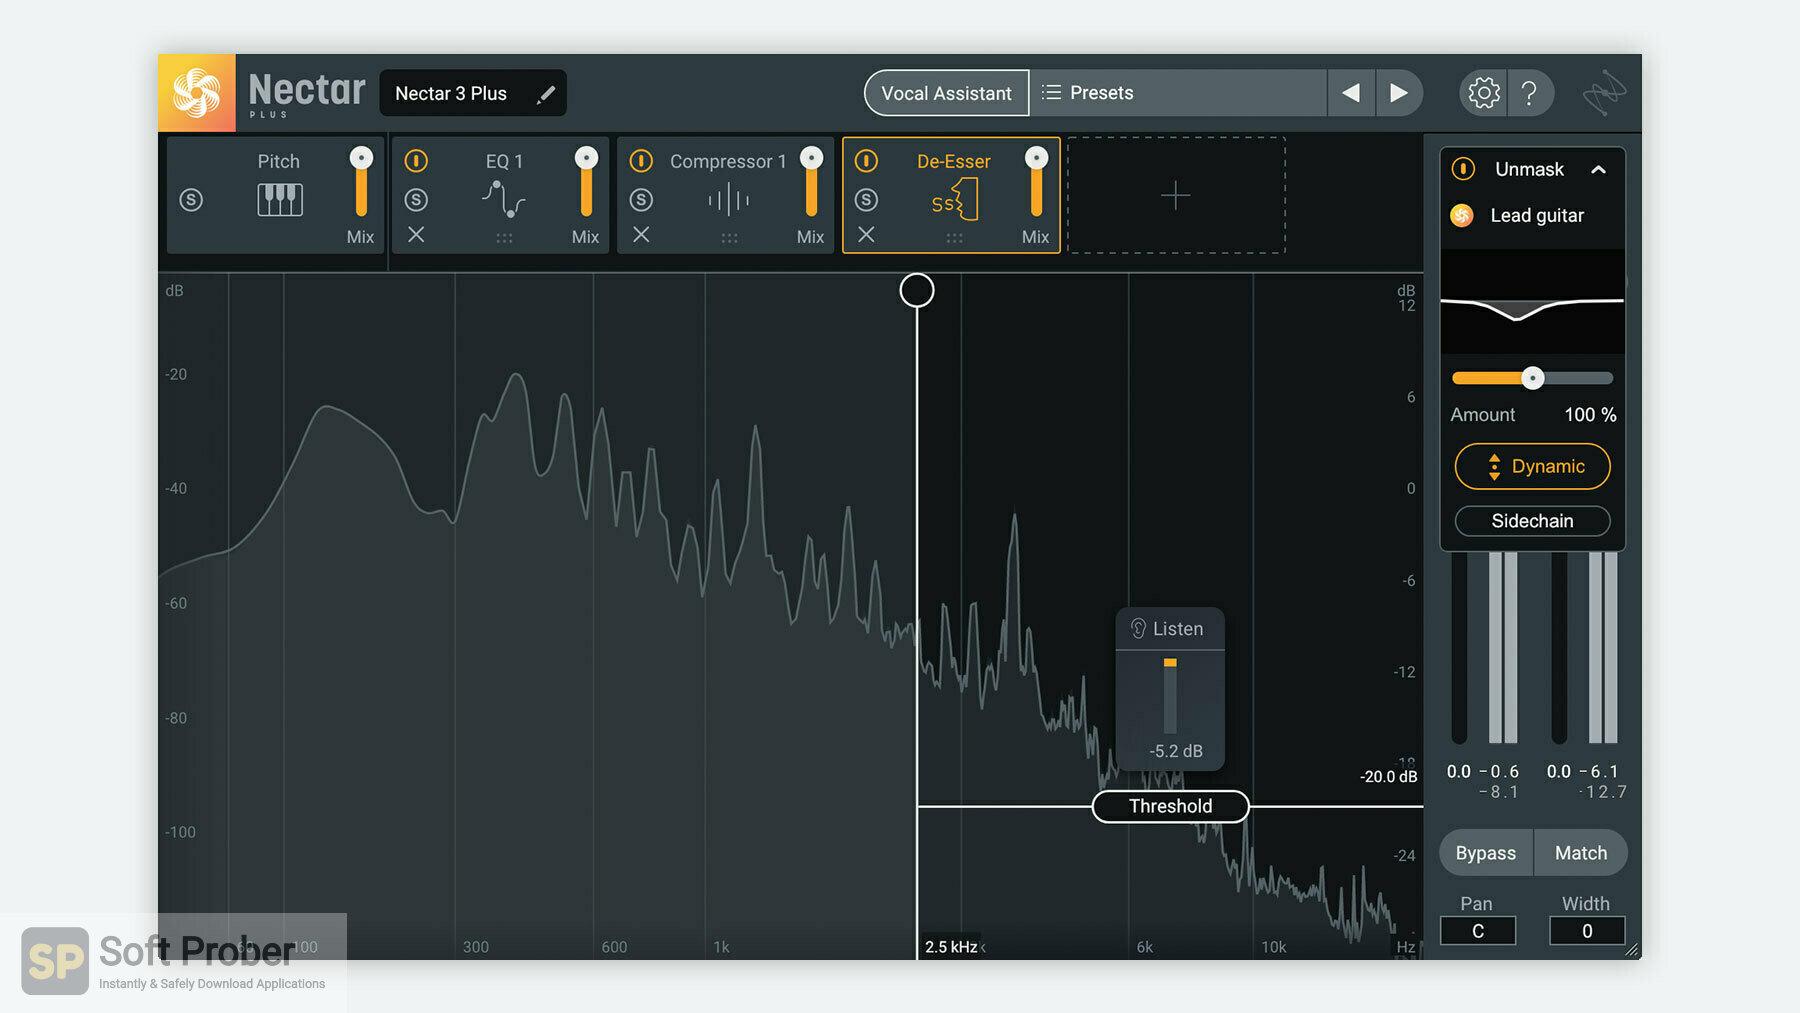 download the new for ios iZotope Nectar Plus 4.0.1